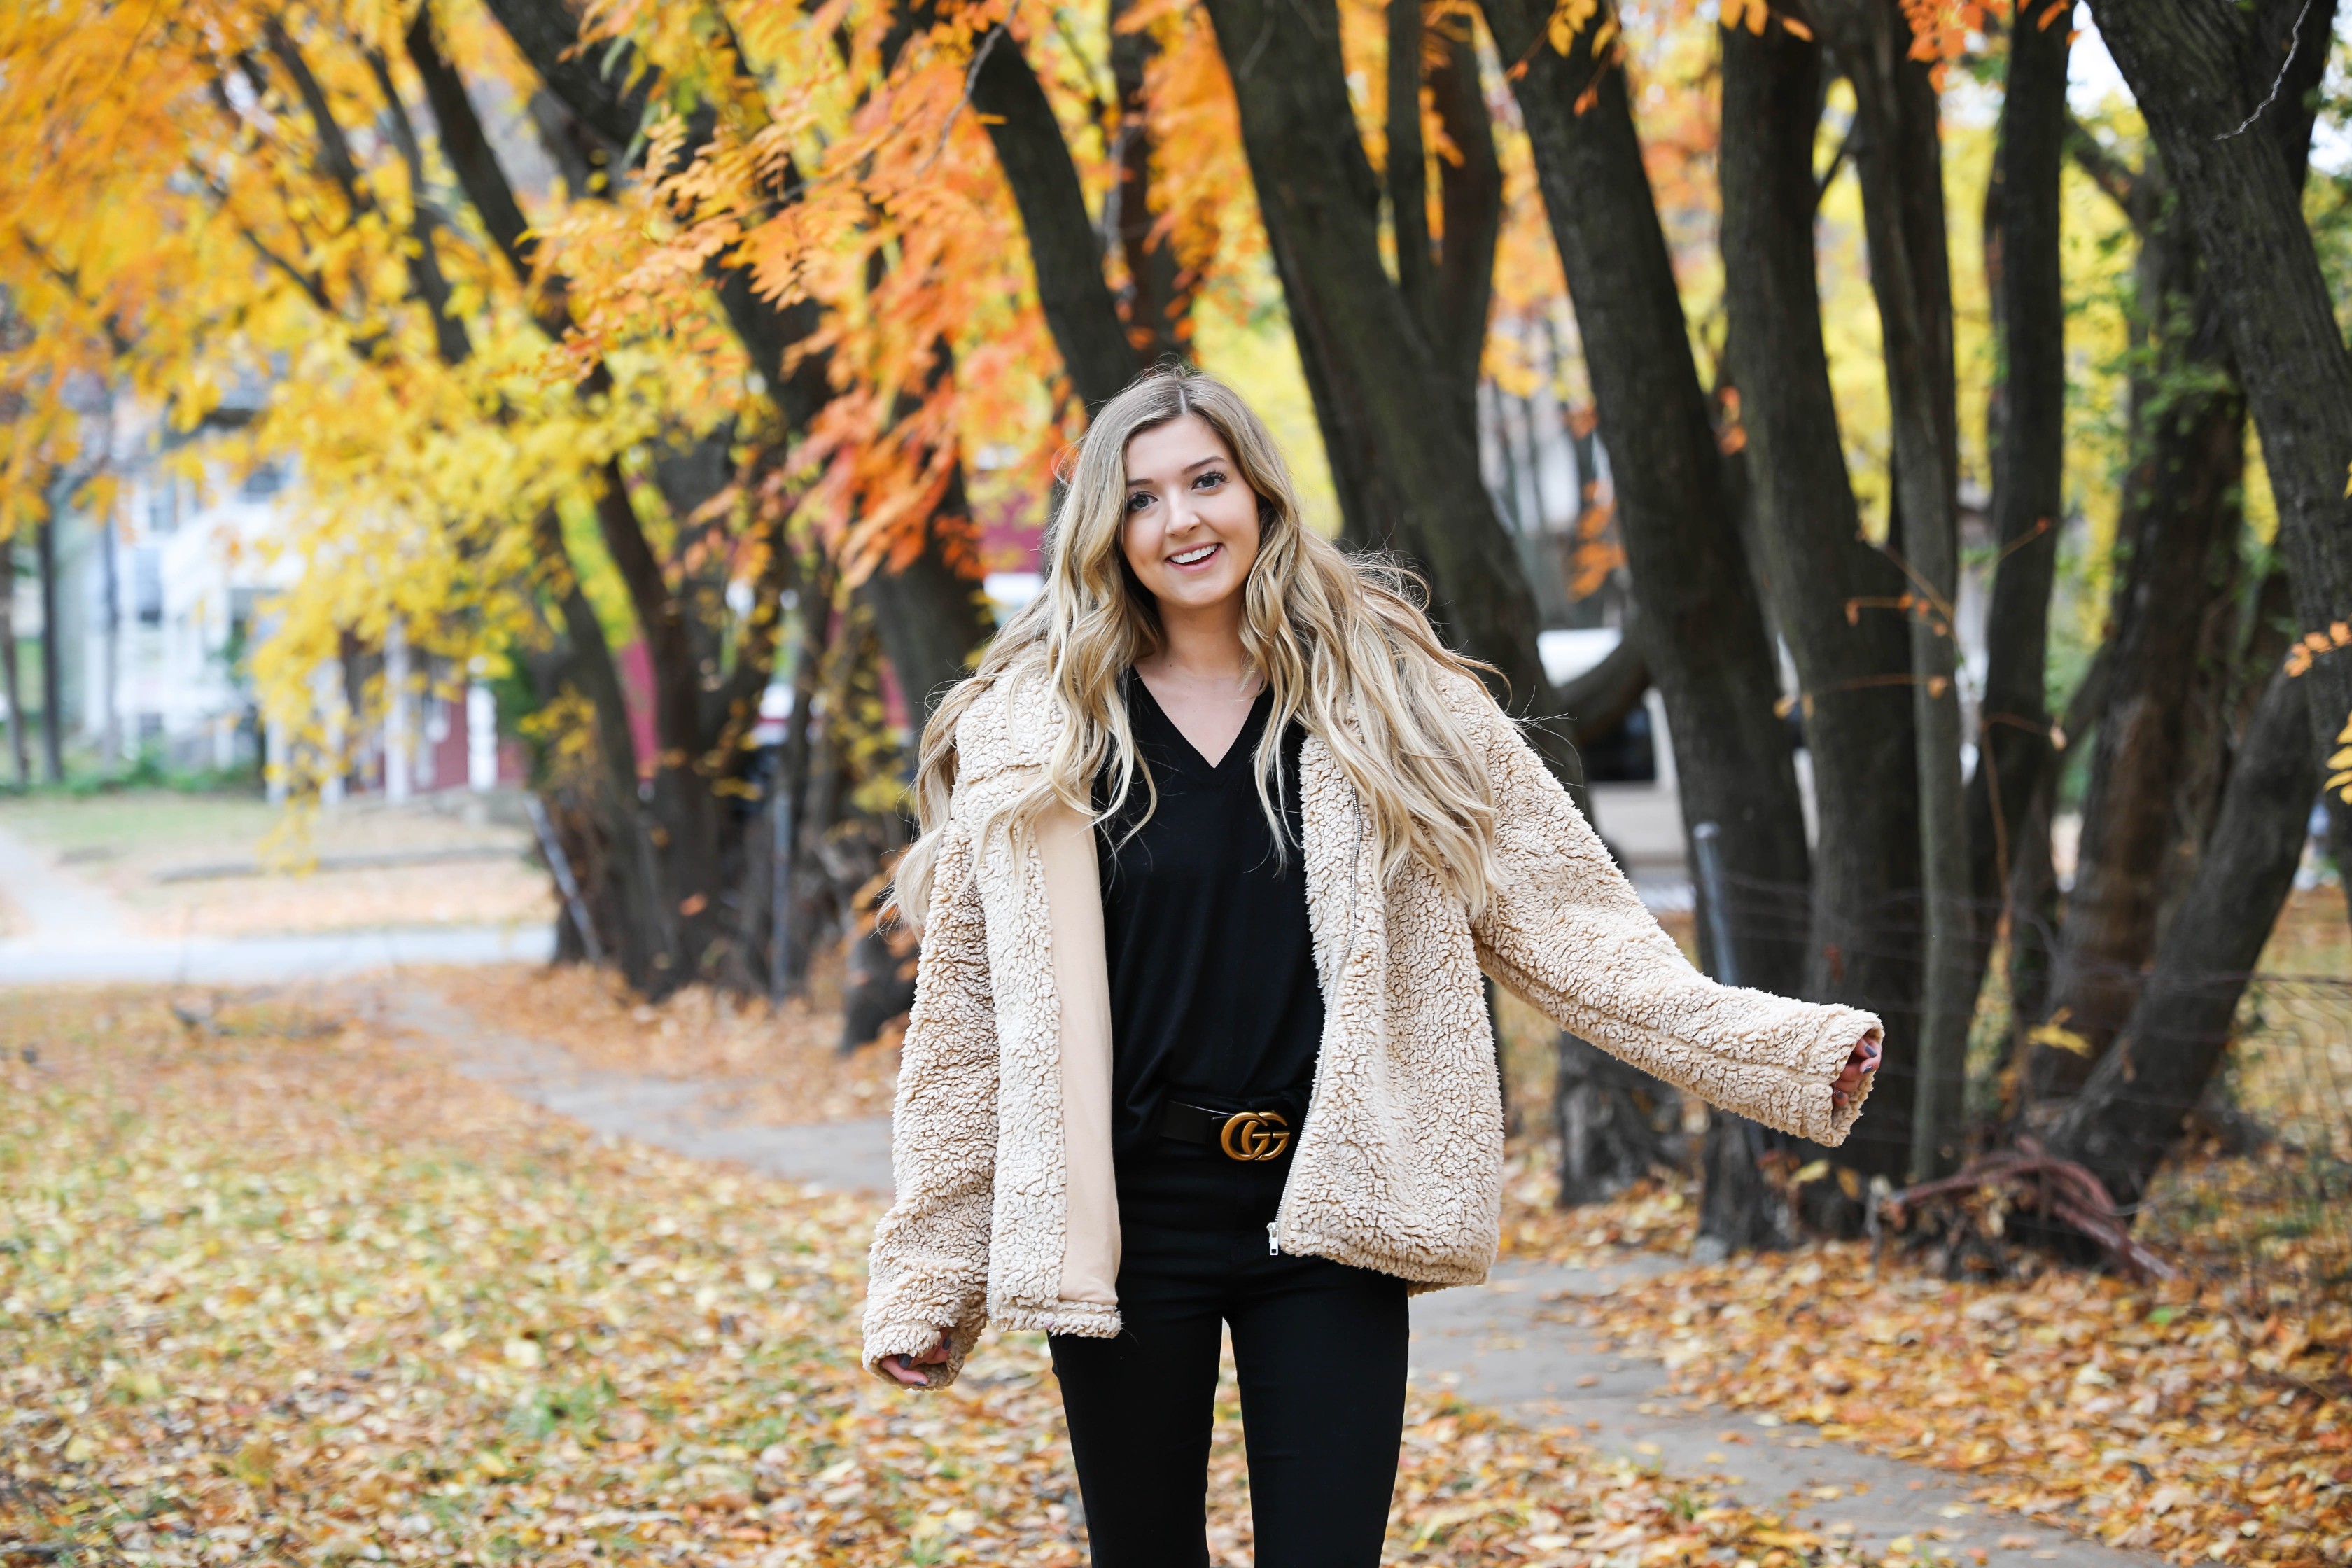 Teddy bear coat roundup! All the comfiest teddy bear fuzzy coats are linked on my blog! I paired mine with an all black outfit and my gucci belt! These are the prettiest photos taken in the fall leaves. Autumn trees are the best! Details on fashion blog daily dose of charm by lauren lindmark